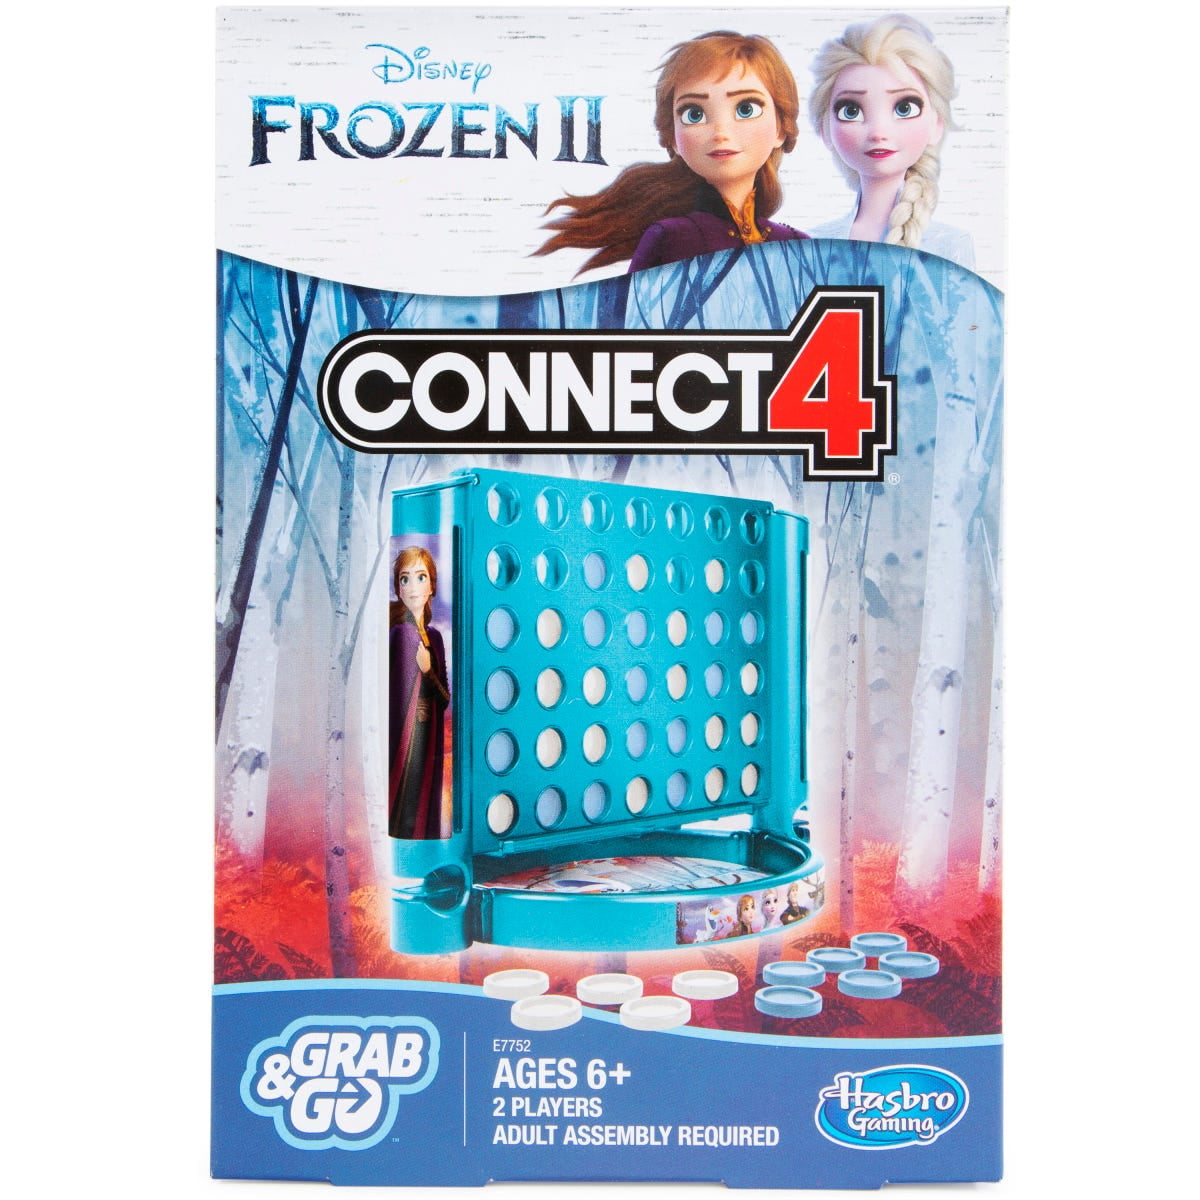 Cardinal Games Frozen 2 Frosted Fishing Game 6054132 for sale online 